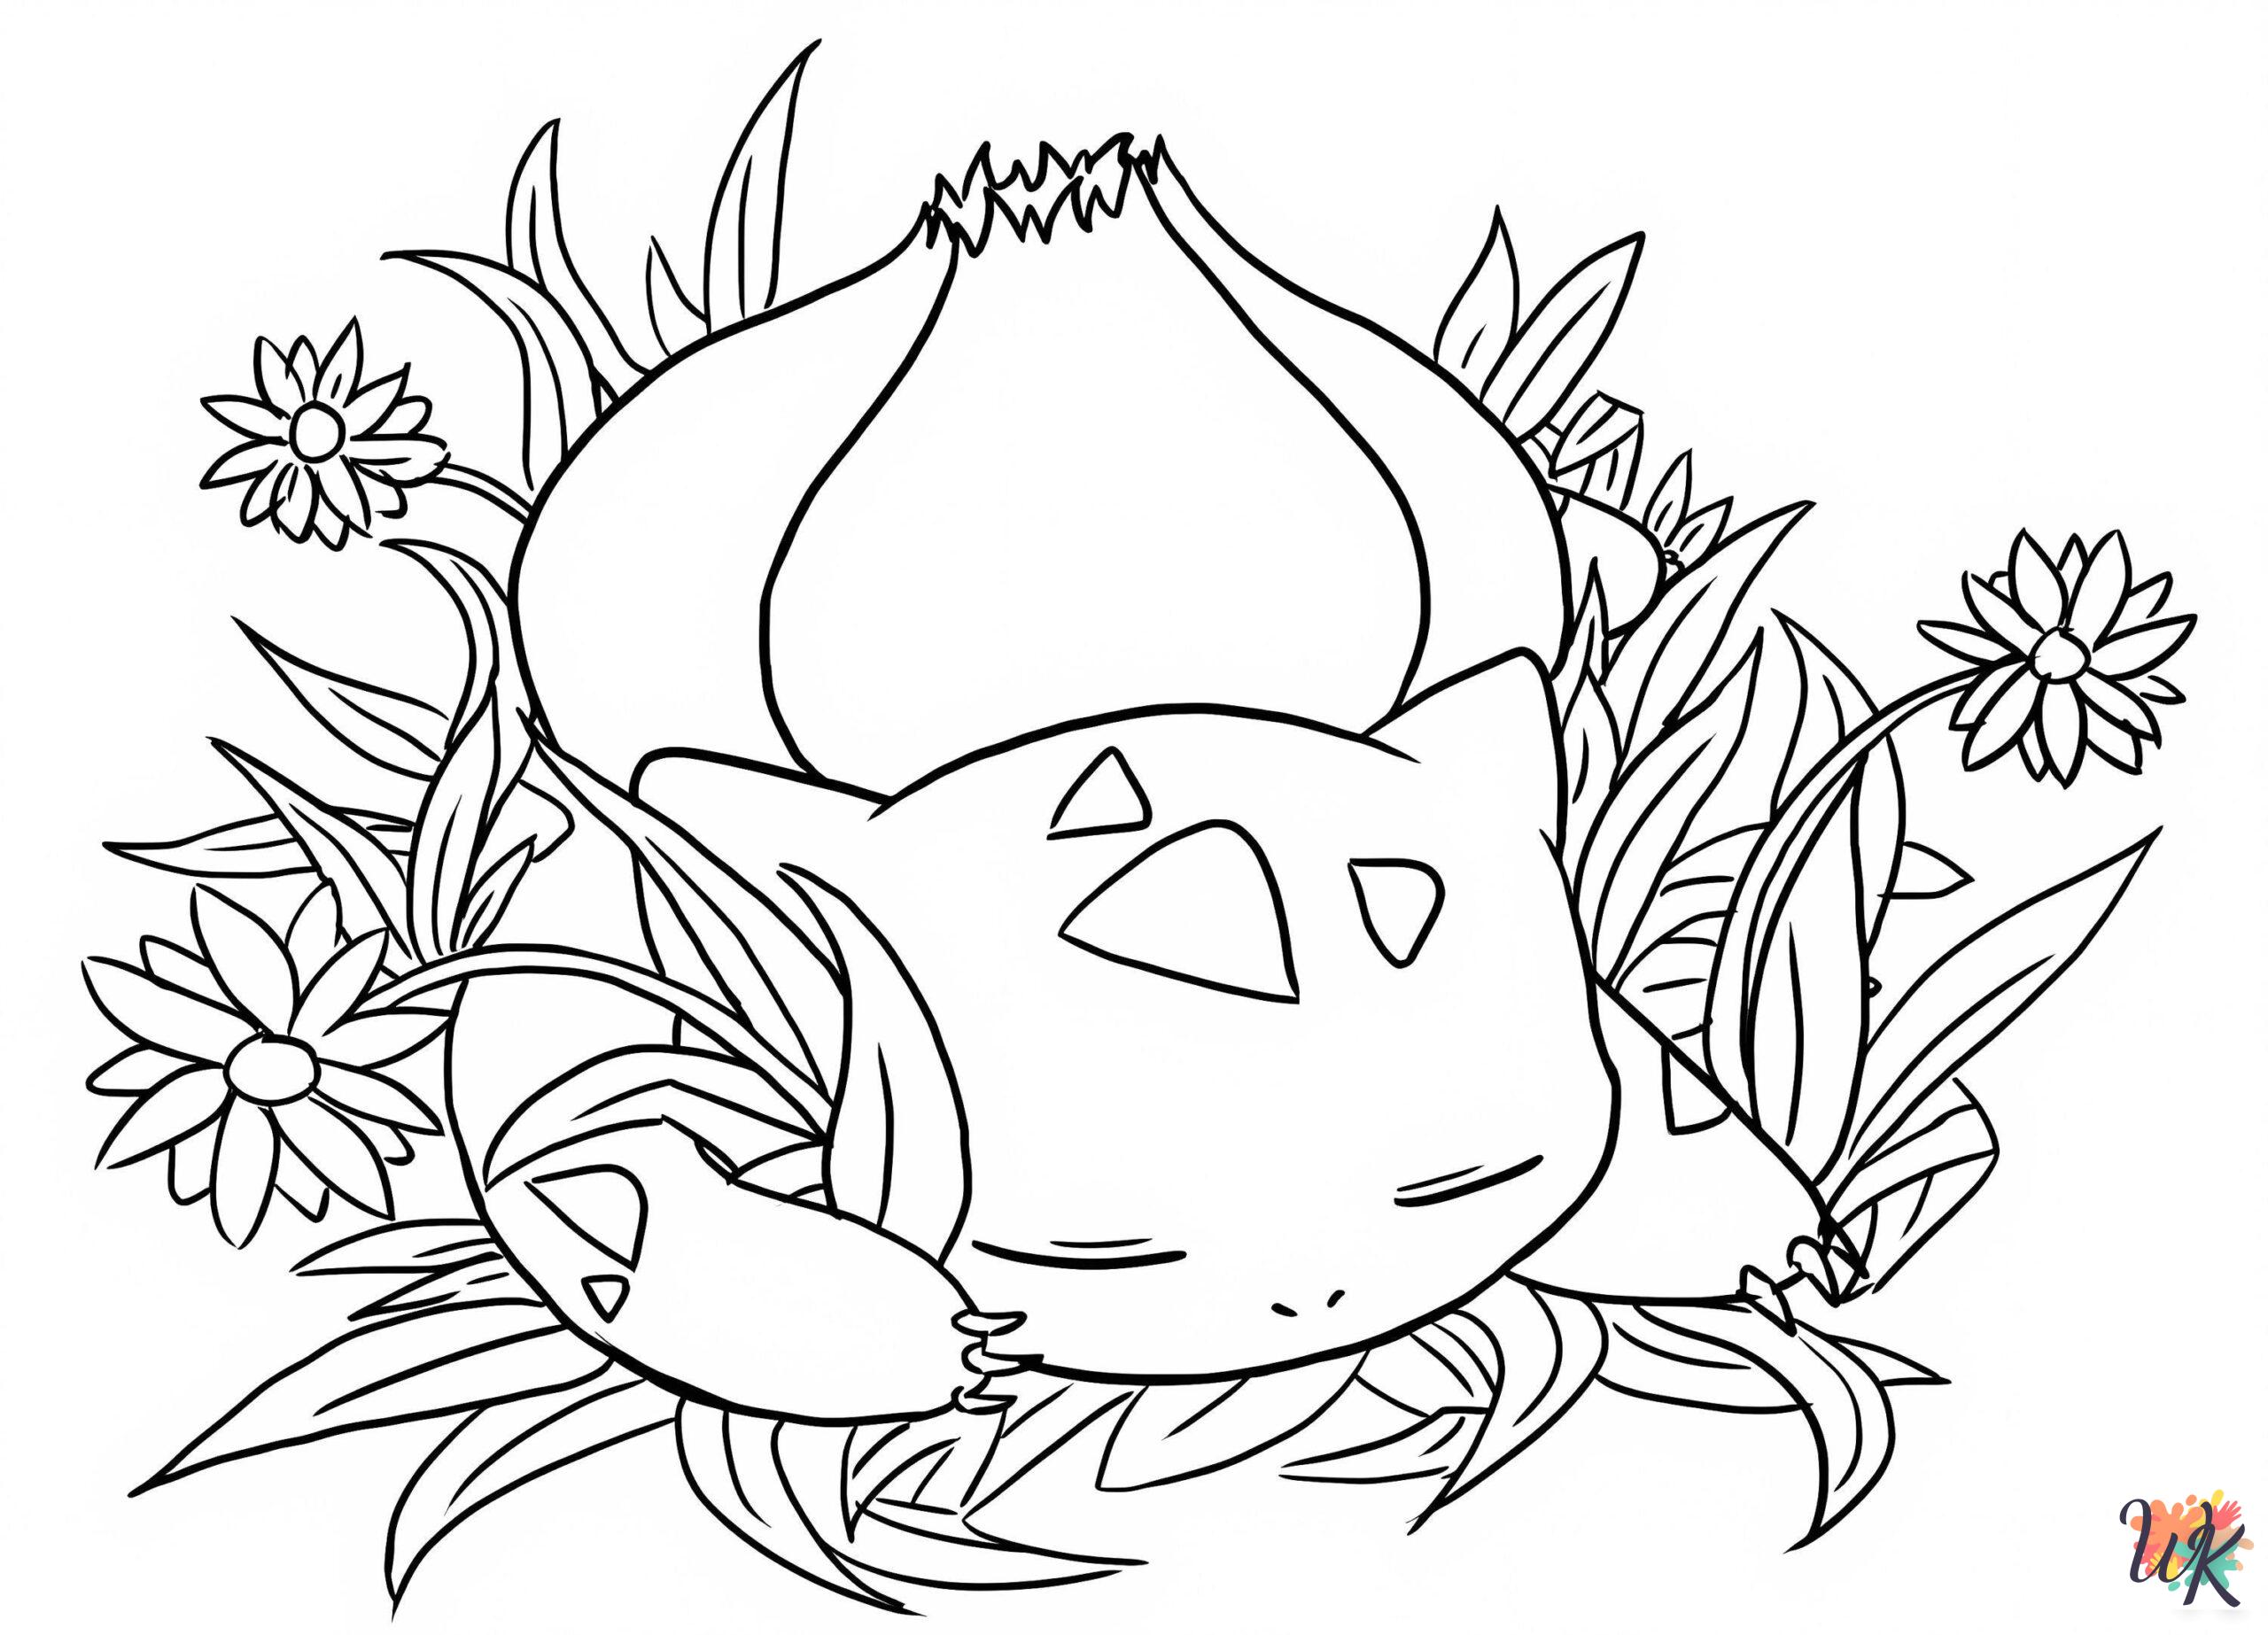 merry Bulbasaur coloring pages